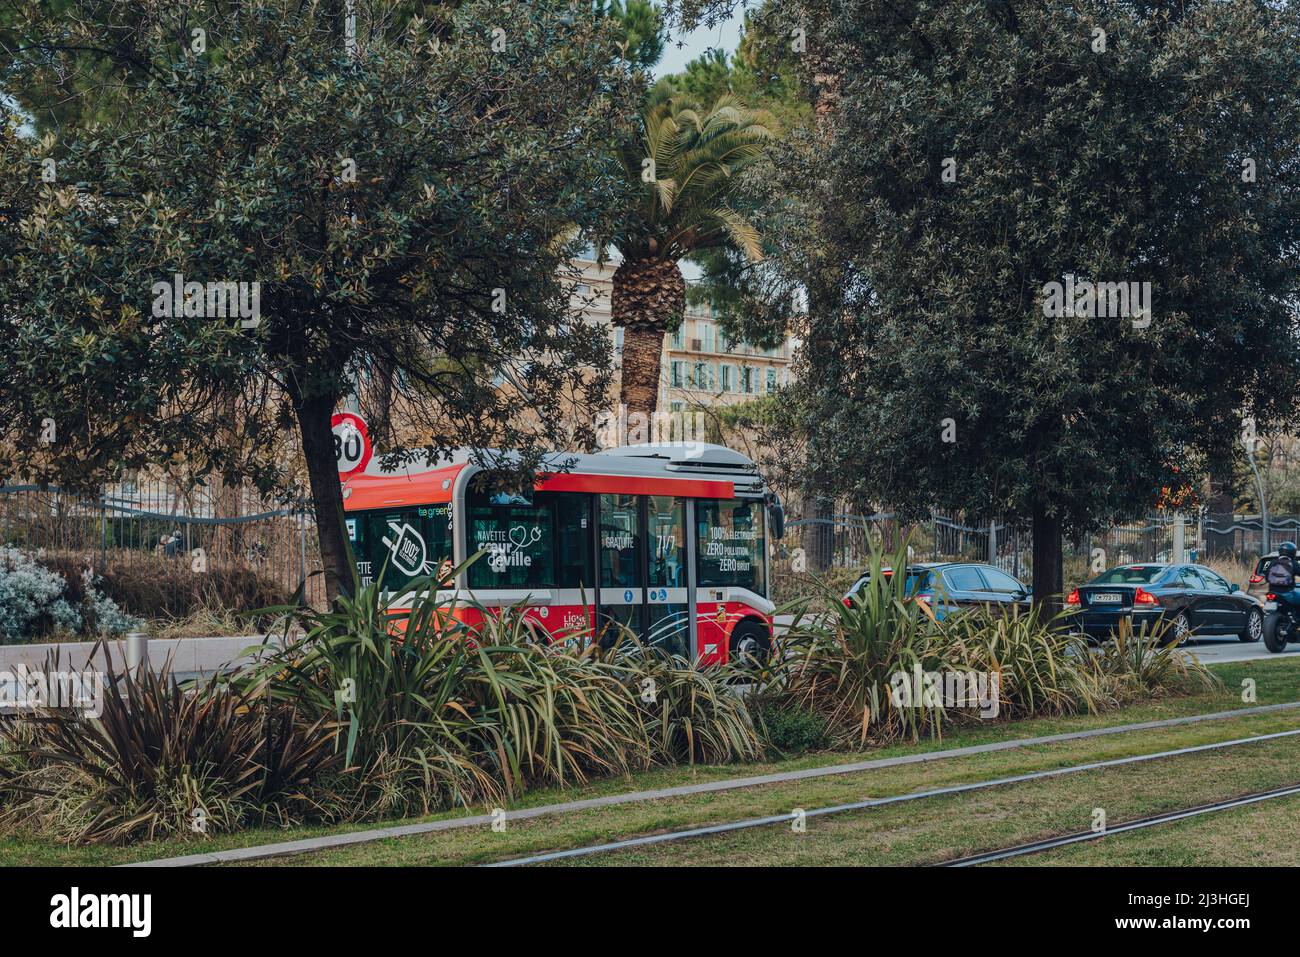 Nice, France - March 10, 2022: View through trees of free electric shuttle bus Coeur de Ville Navette (Heart of the City) on a street in Nice, a famou Stock Photo